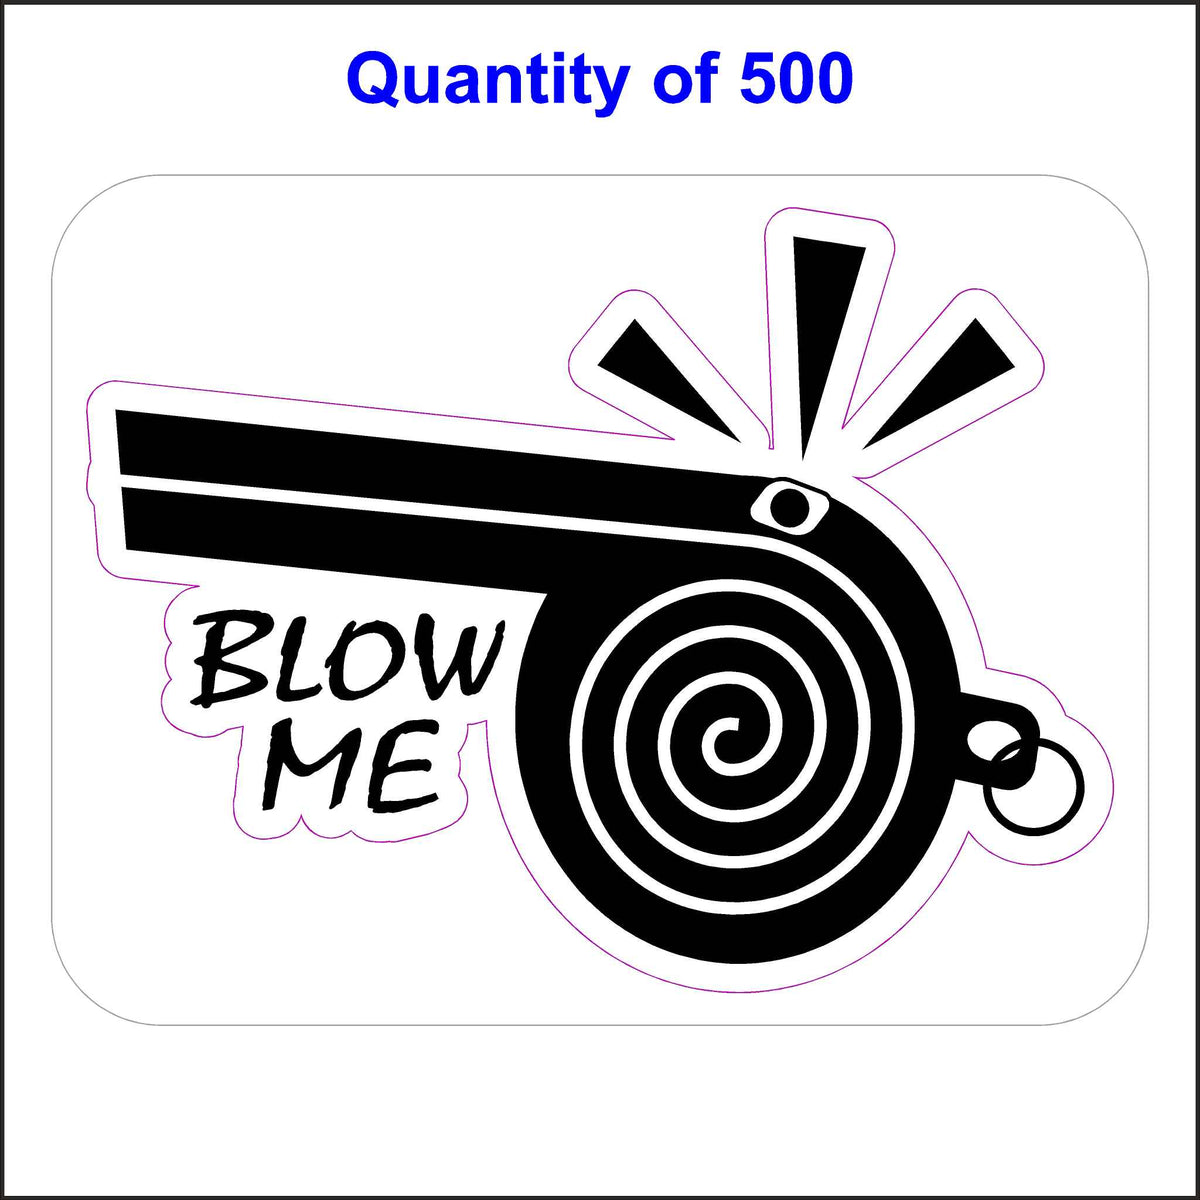 Whistle Blower Sticker, Blow Me Stickers. Black Whistle and the Words Blow Me on a White Background. 500 Quantity.